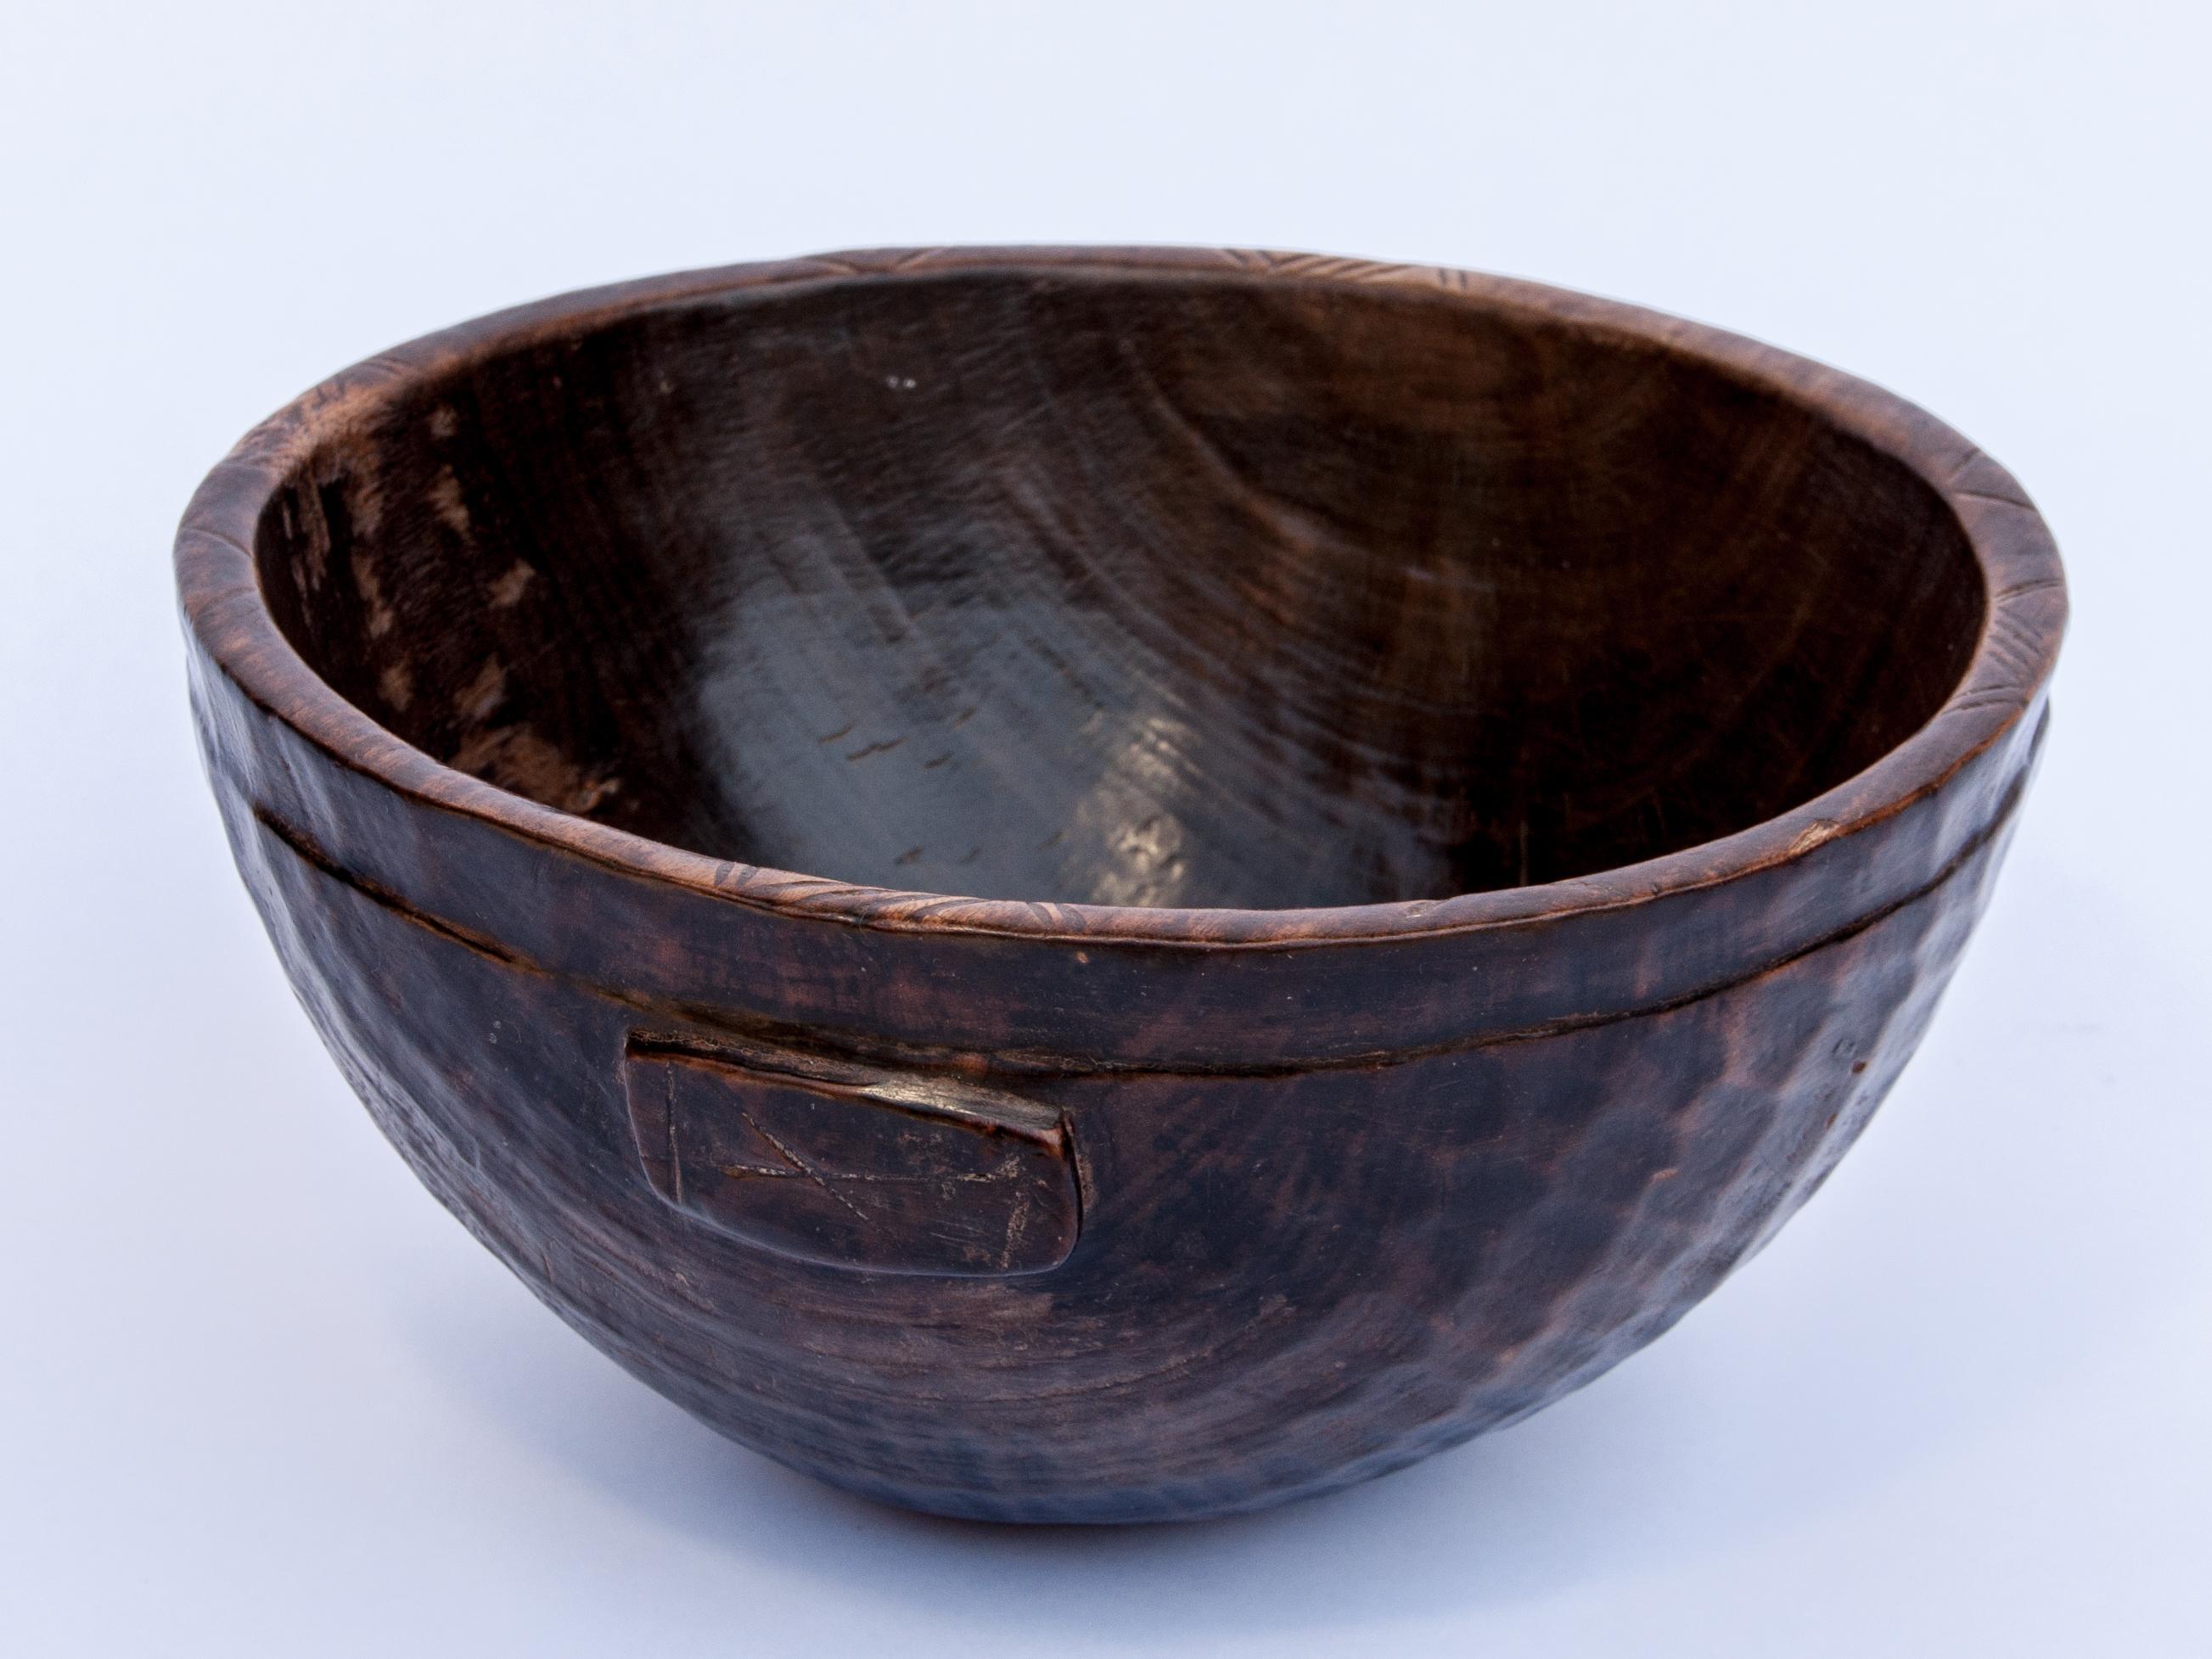 Tribal wooden bowl. Hand hewn, from Niger, mid-20th century. 11.5 inch diameter by 6 inches tall.
This rustic wooden bowl was fashioned by hand using very basic tools. It was used to hold food or grain. The dappled texture on the exterior, a result